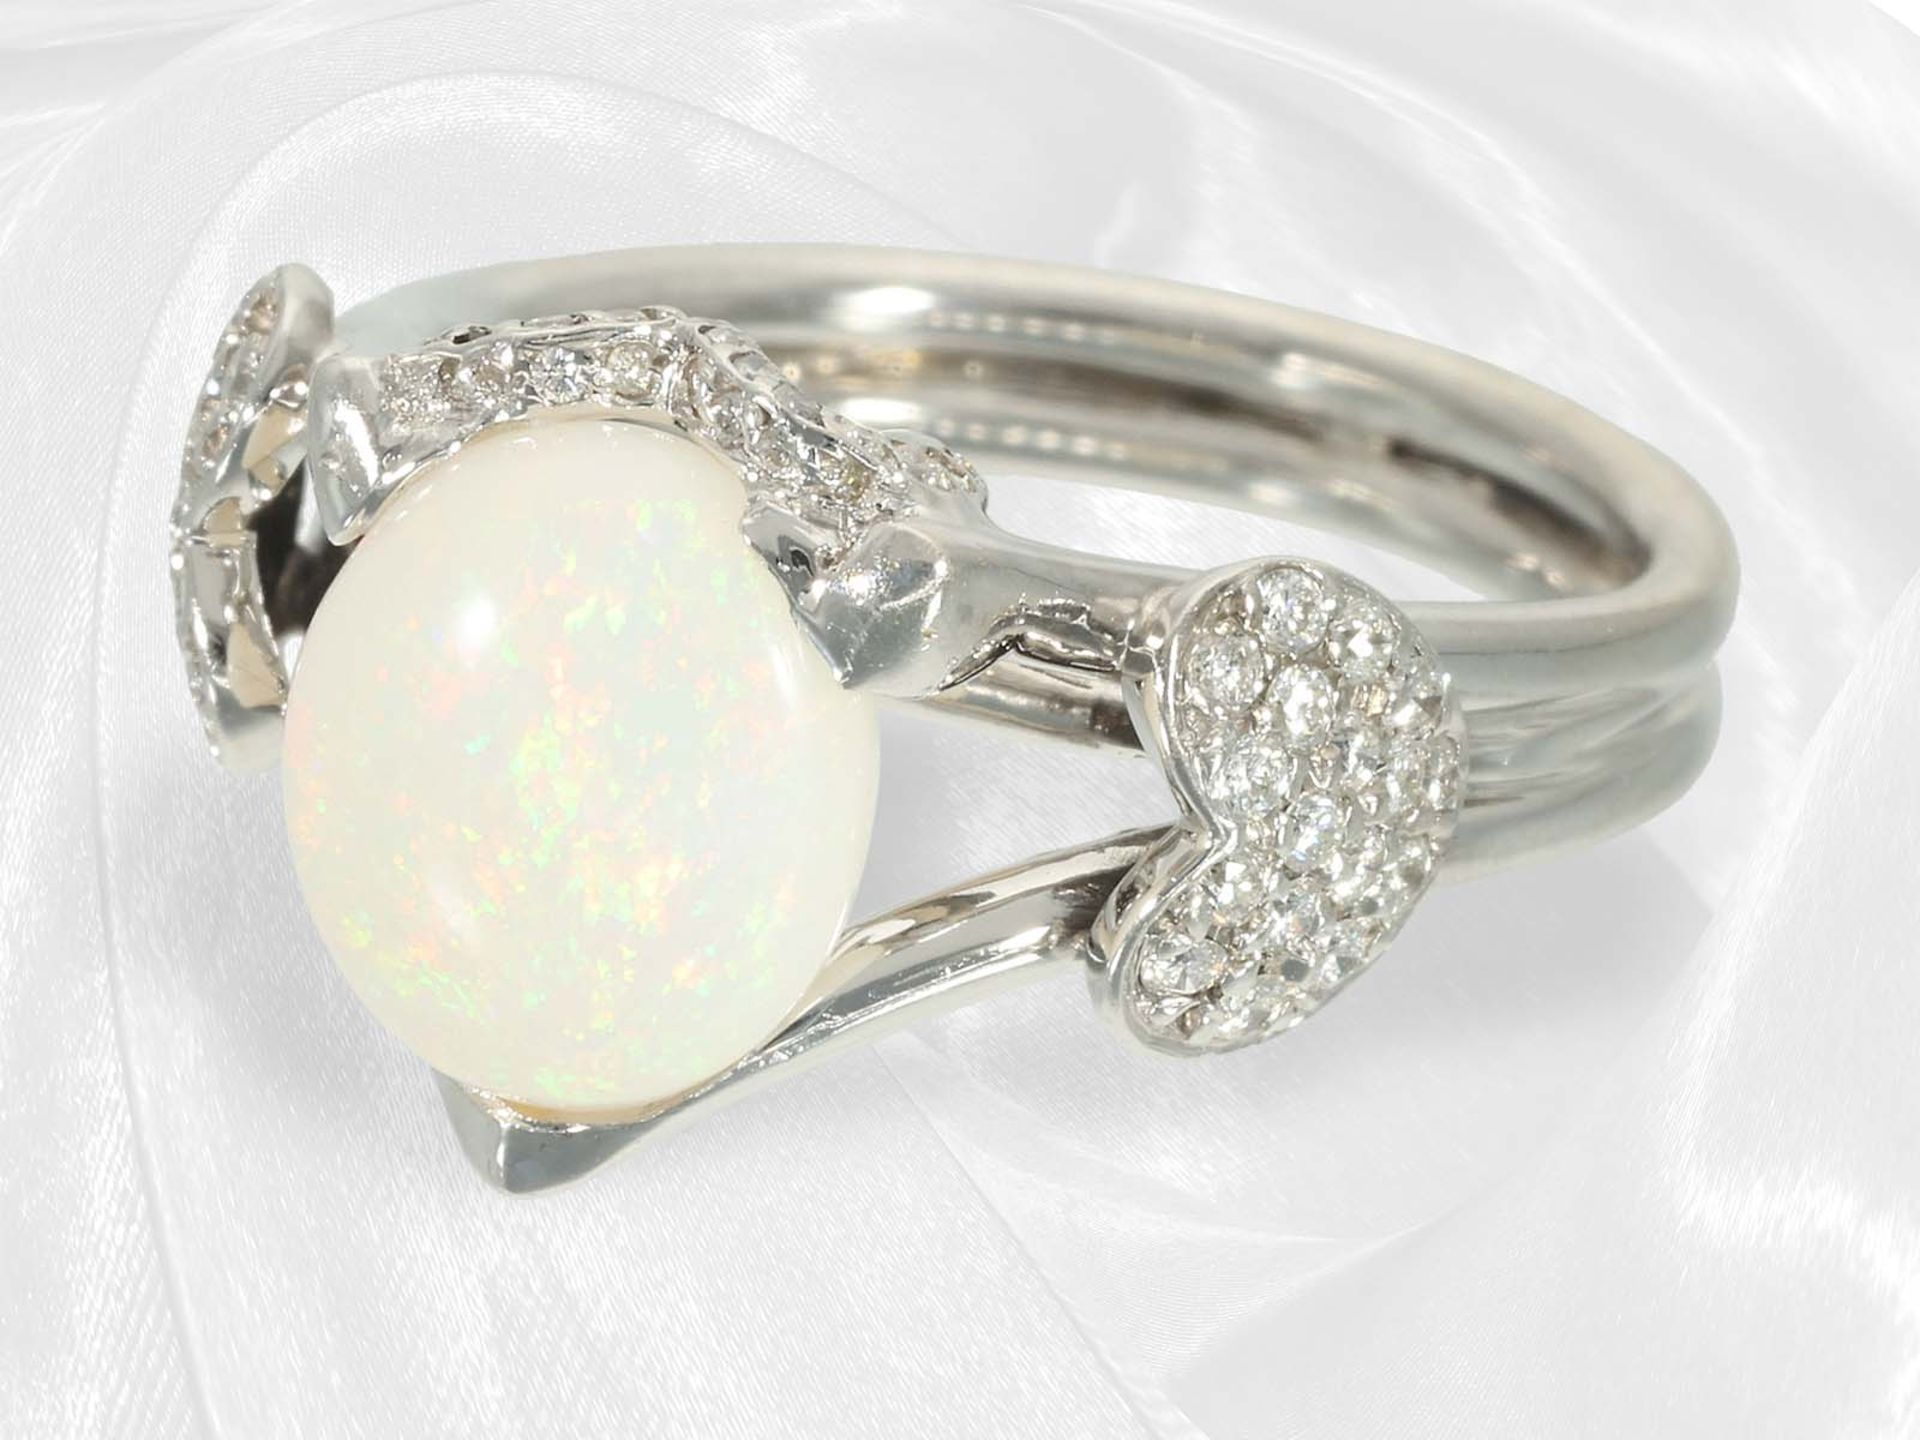 Fancy designer goldsmith ring with opal and brilliant-cut diamonds, "Hearts", 18K white gold, handma - Image 3 of 5